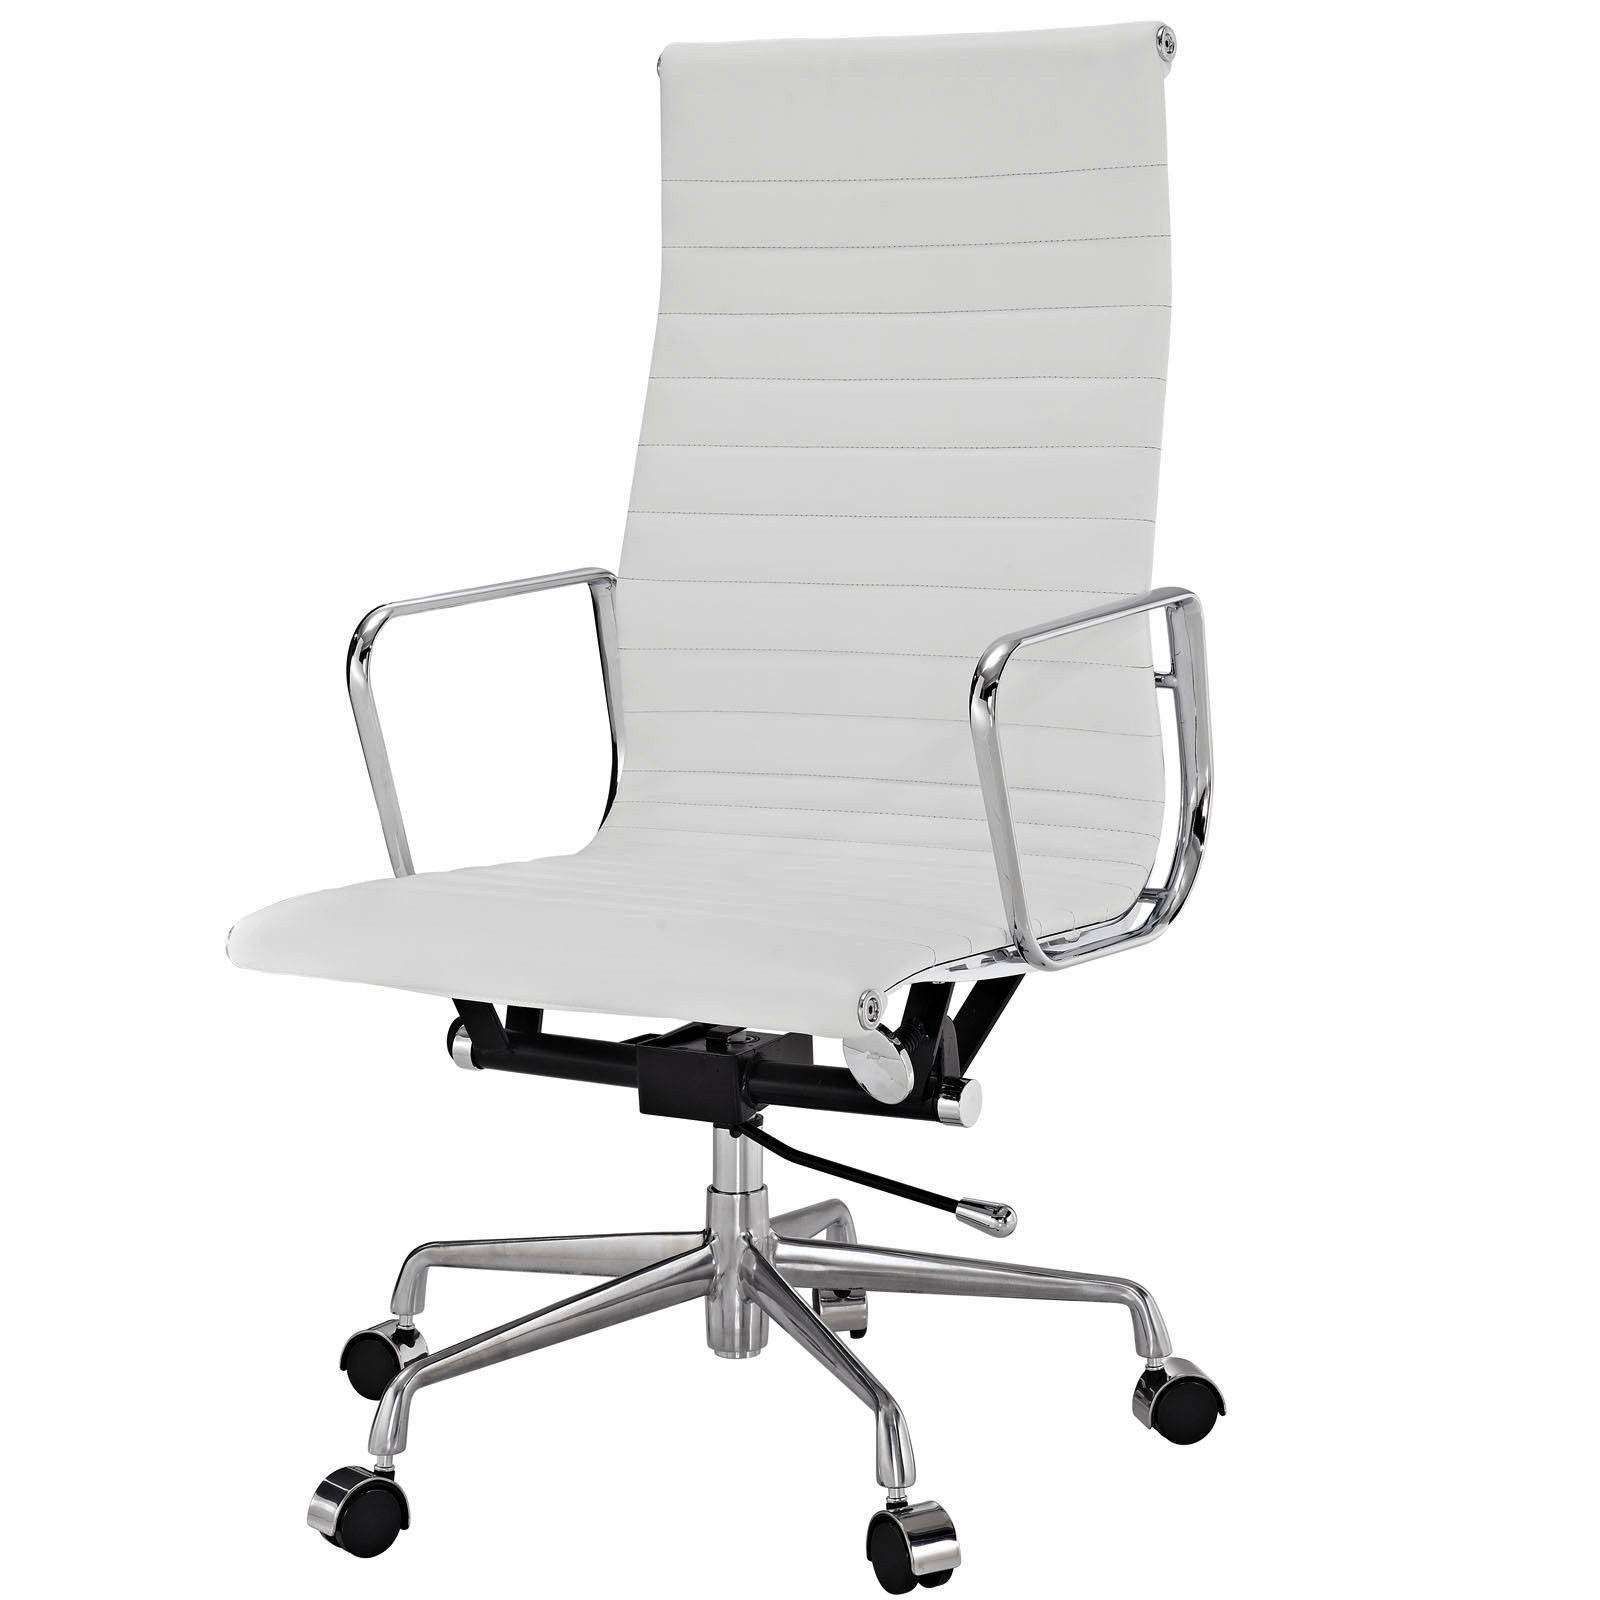 Modterior Regarding Well Liked Classic Executive Office Chairs (View 9 of 15)